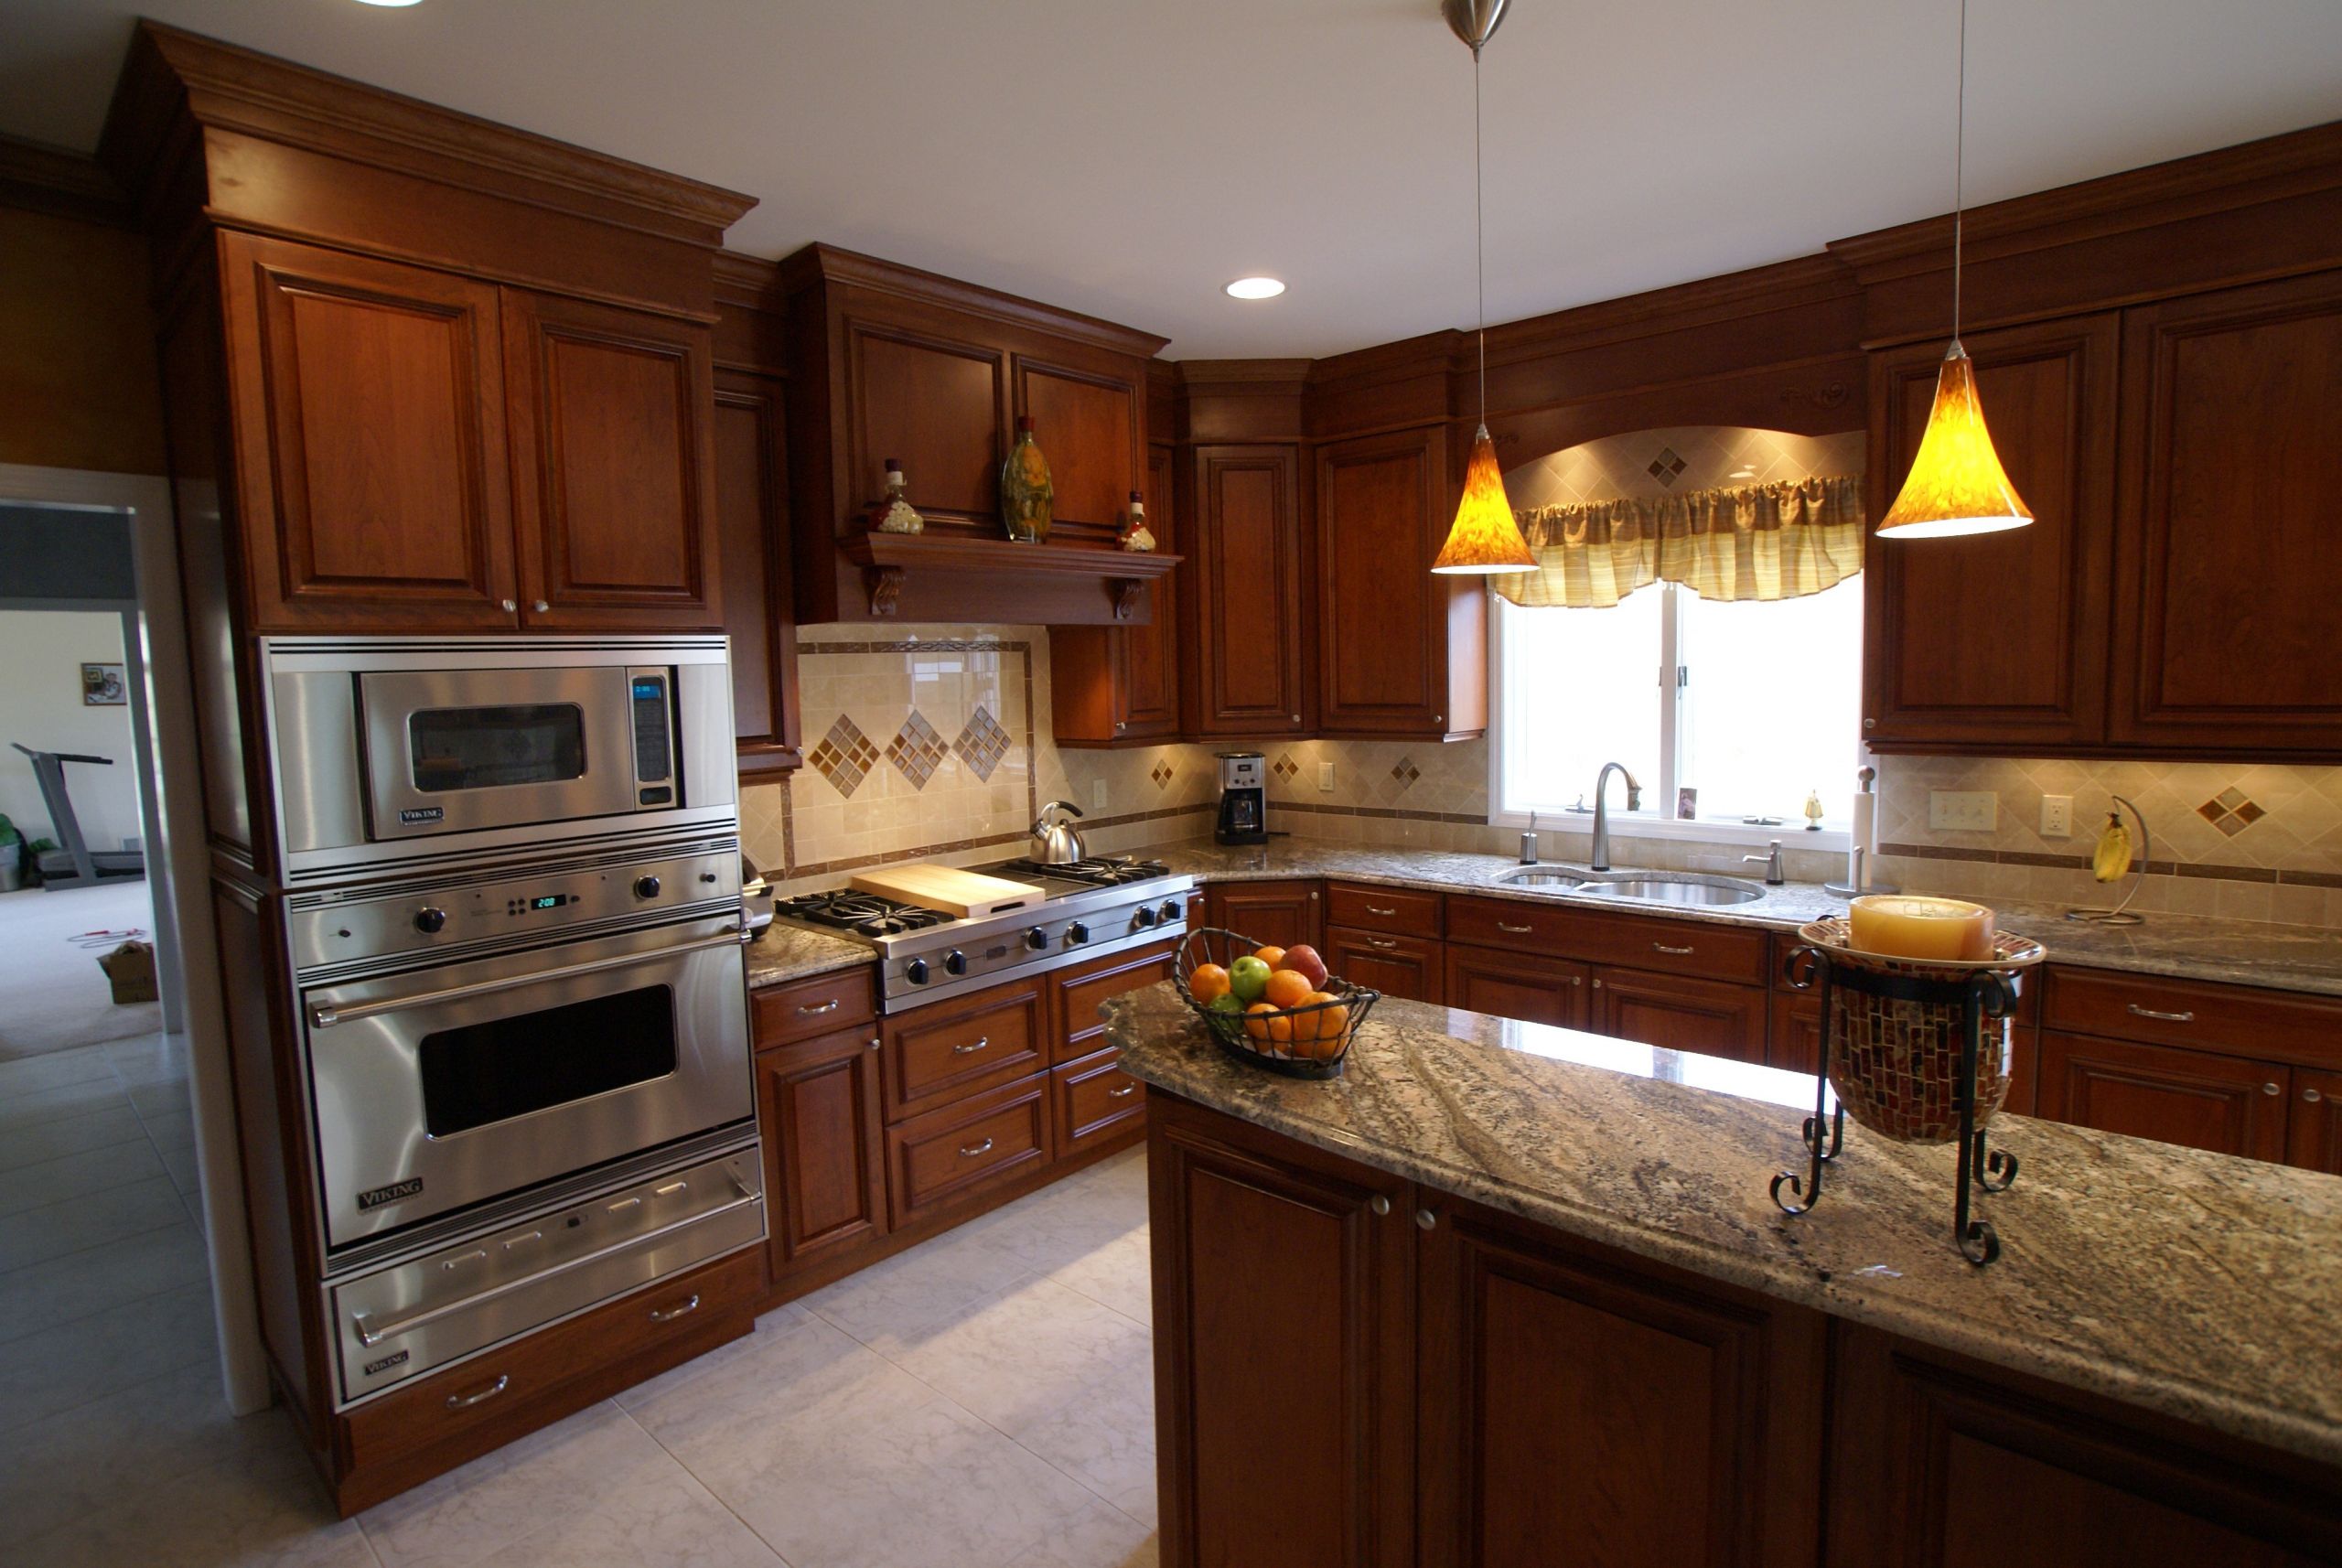 Kitchen Remodeling Photos
 Monmouth County Kitchen Remodeling Ideas to Inspire You